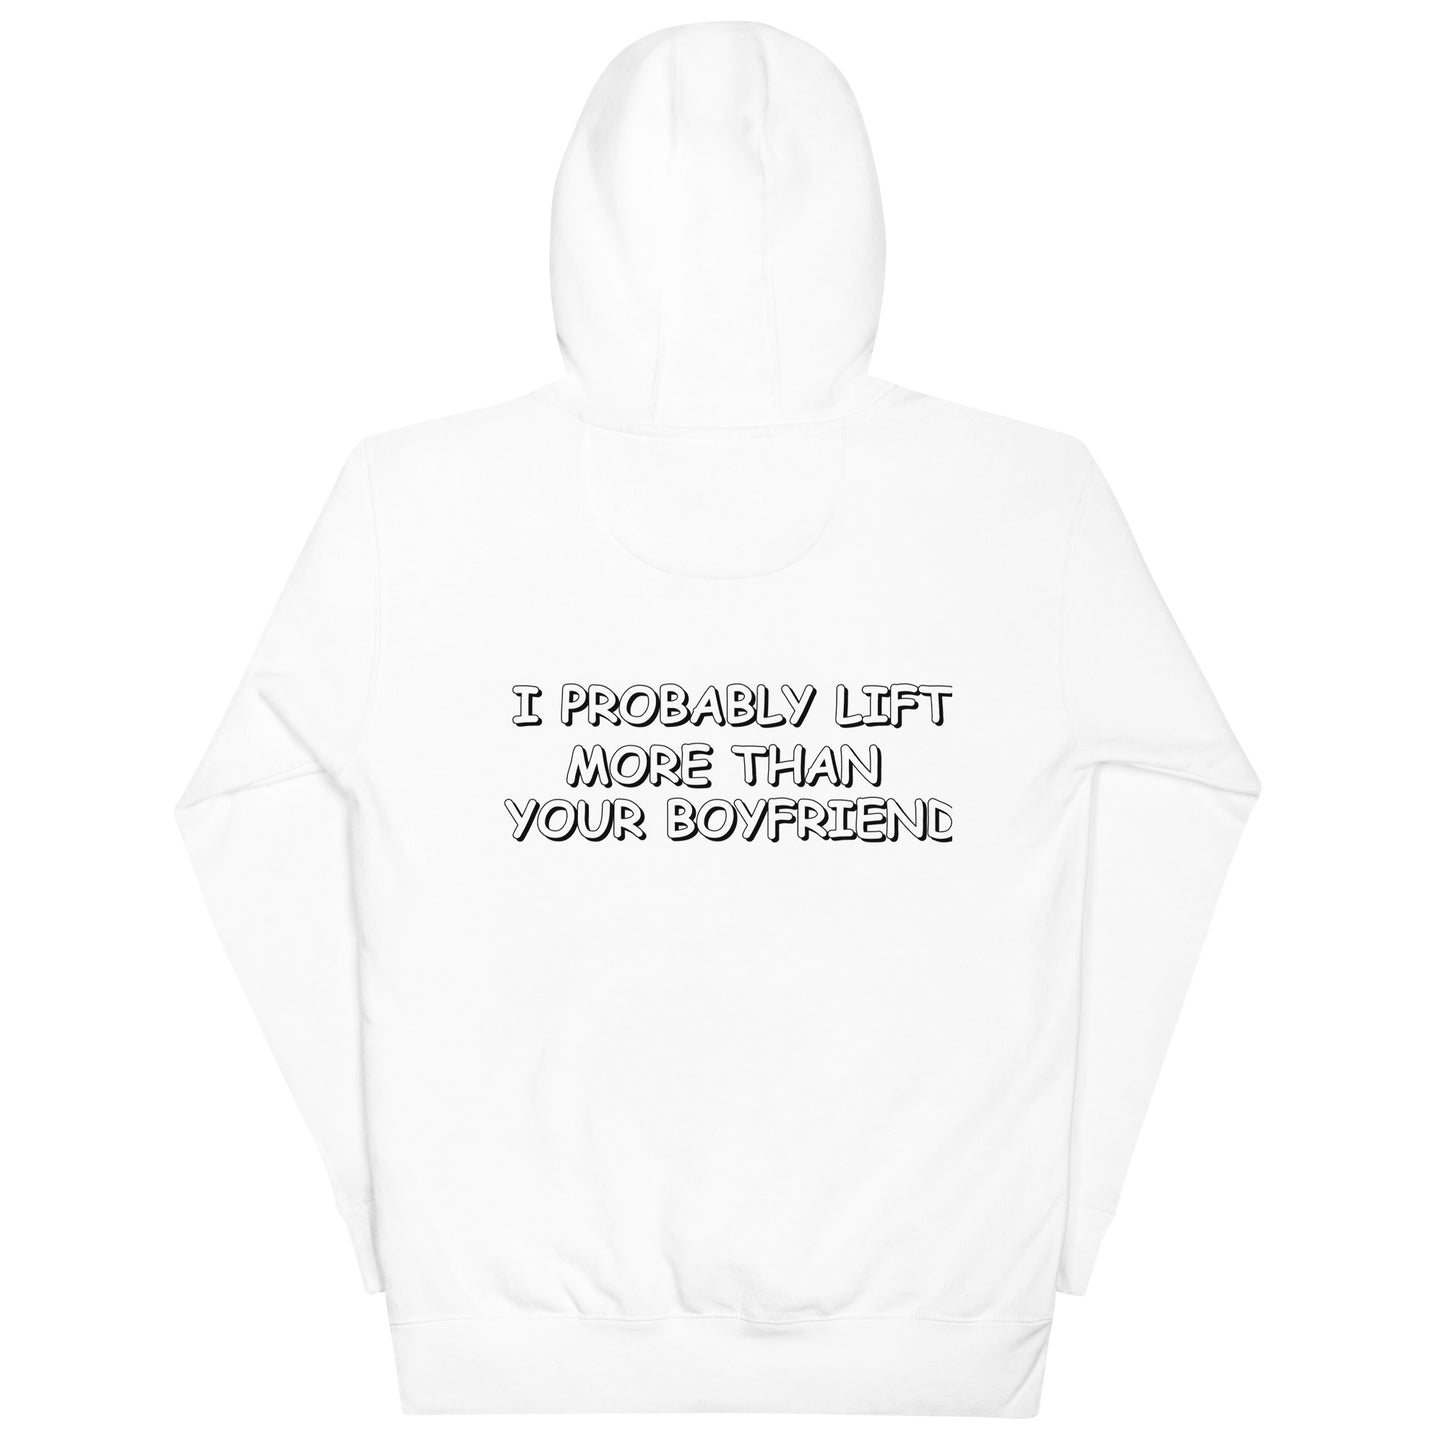 "Probably lift more.." - Women's Hoodie